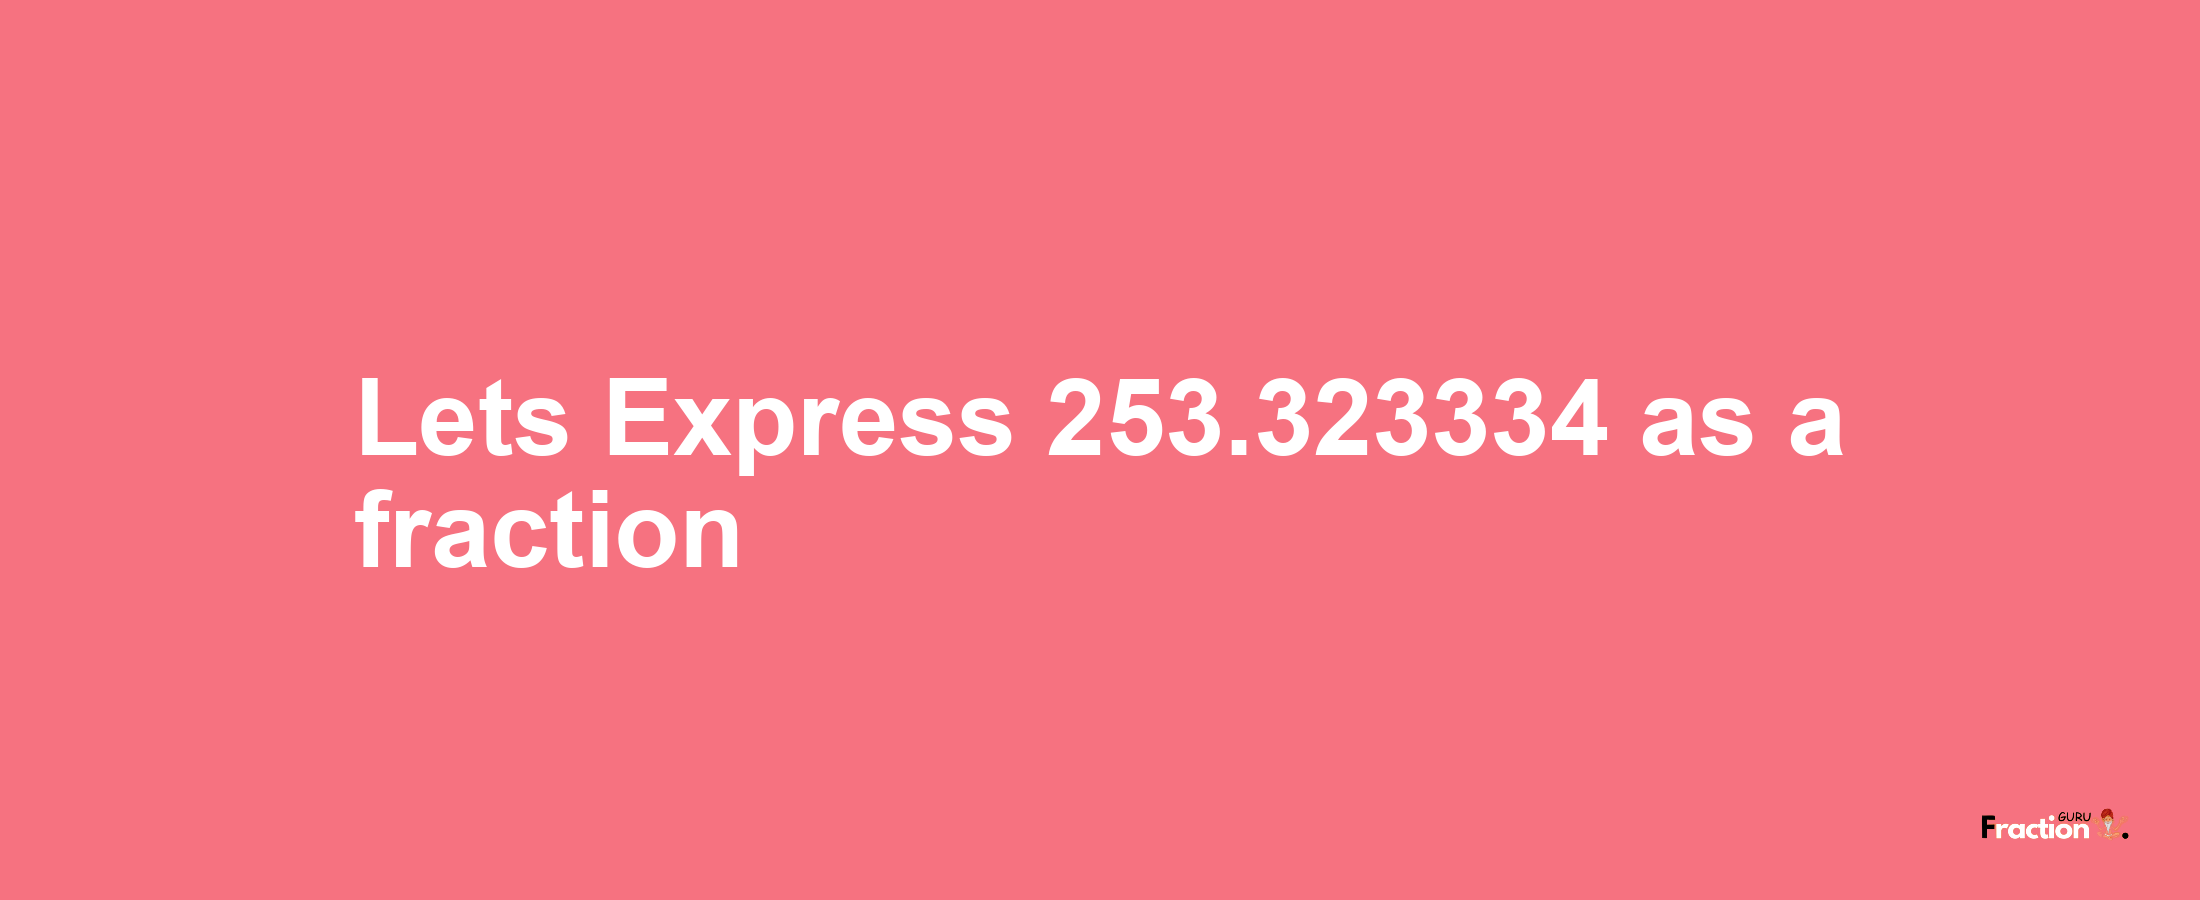 Lets Express 253.323334 as afraction